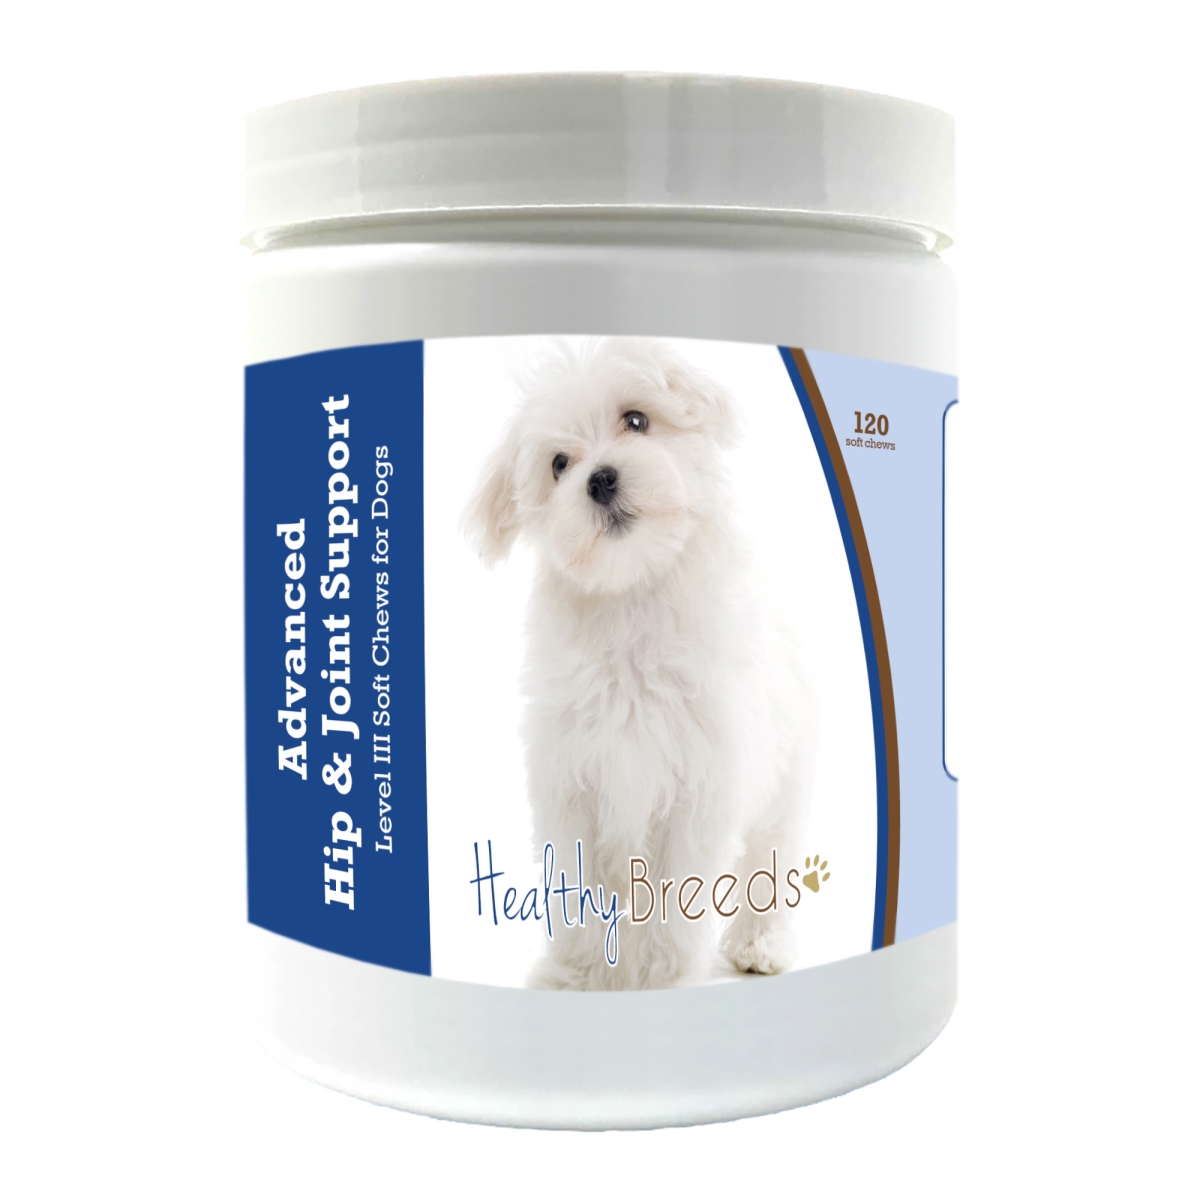 Picture of Healthy Breeds 192959898651 Maltese Advanced Hip & Joint Support Level III Soft Chews for Dogs